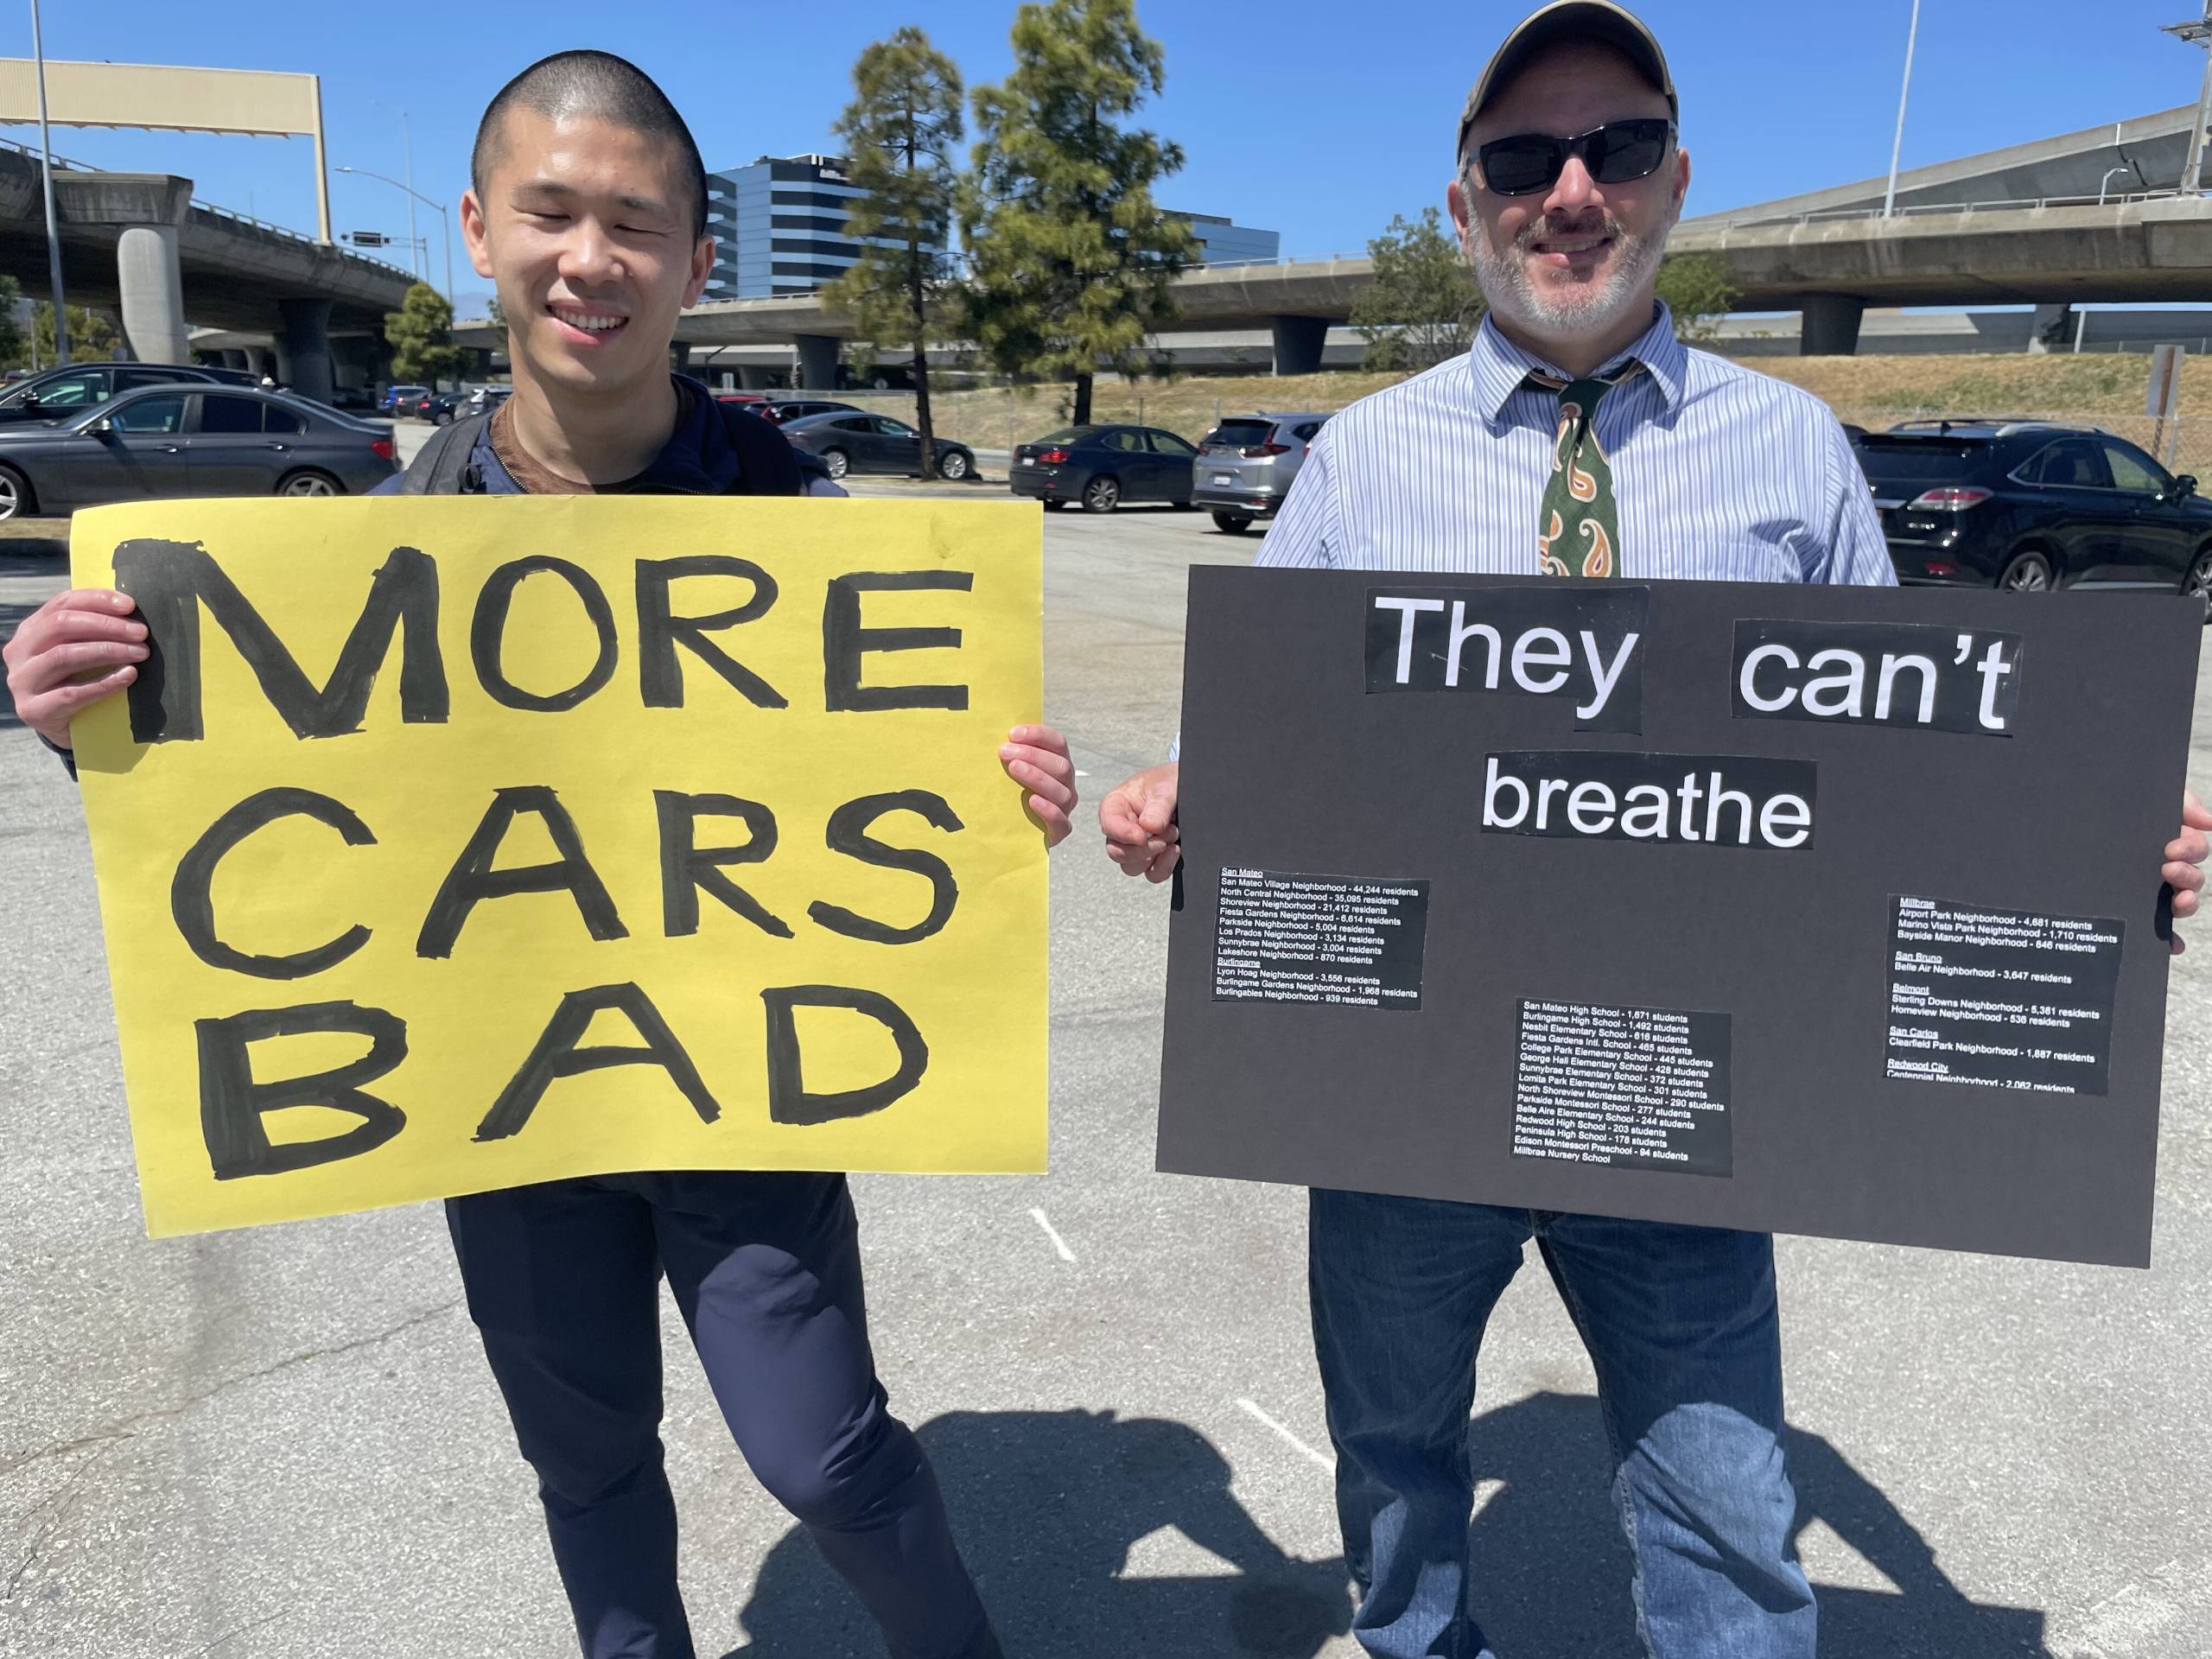 Two men, one young and Asian with a shaved head, the other middle-aged and white, with sunglasses, a baseball cap and a white beard, both smiling, hold signs that read "More Cars Bad" and "They Can't Breathe"